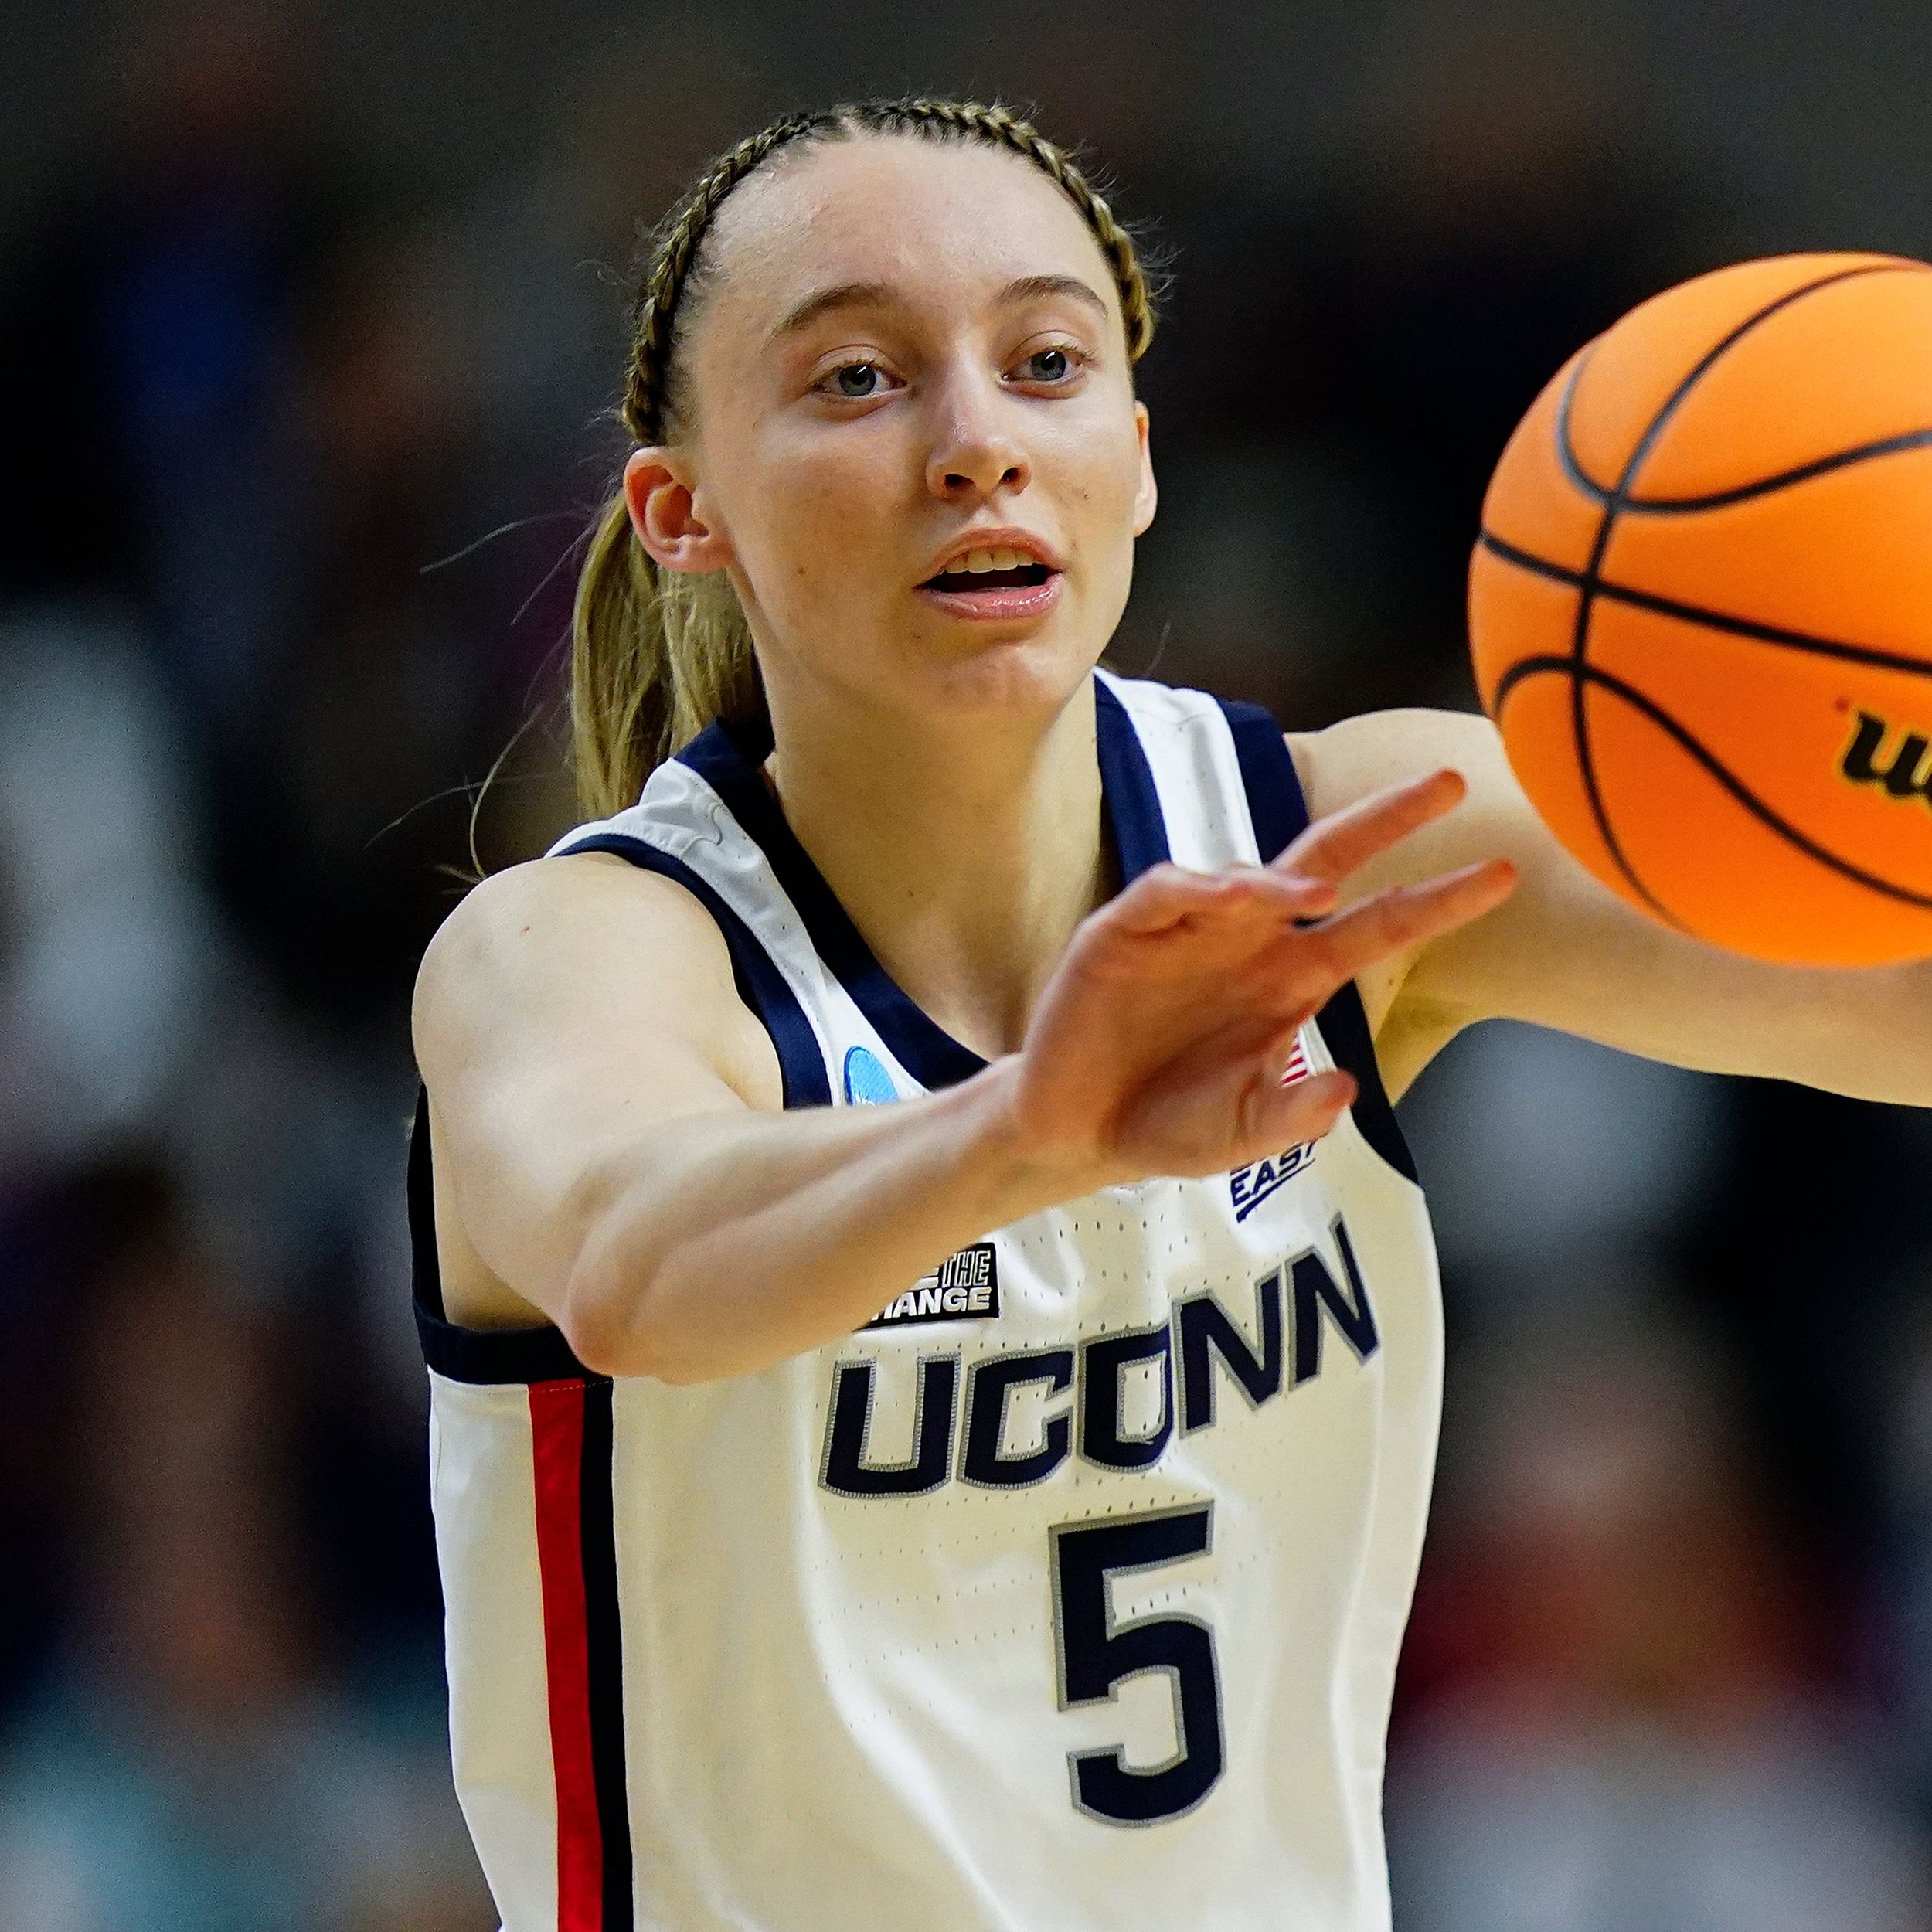 UConn star Paige Bueckers' Final Four homecoming has Minneapolis